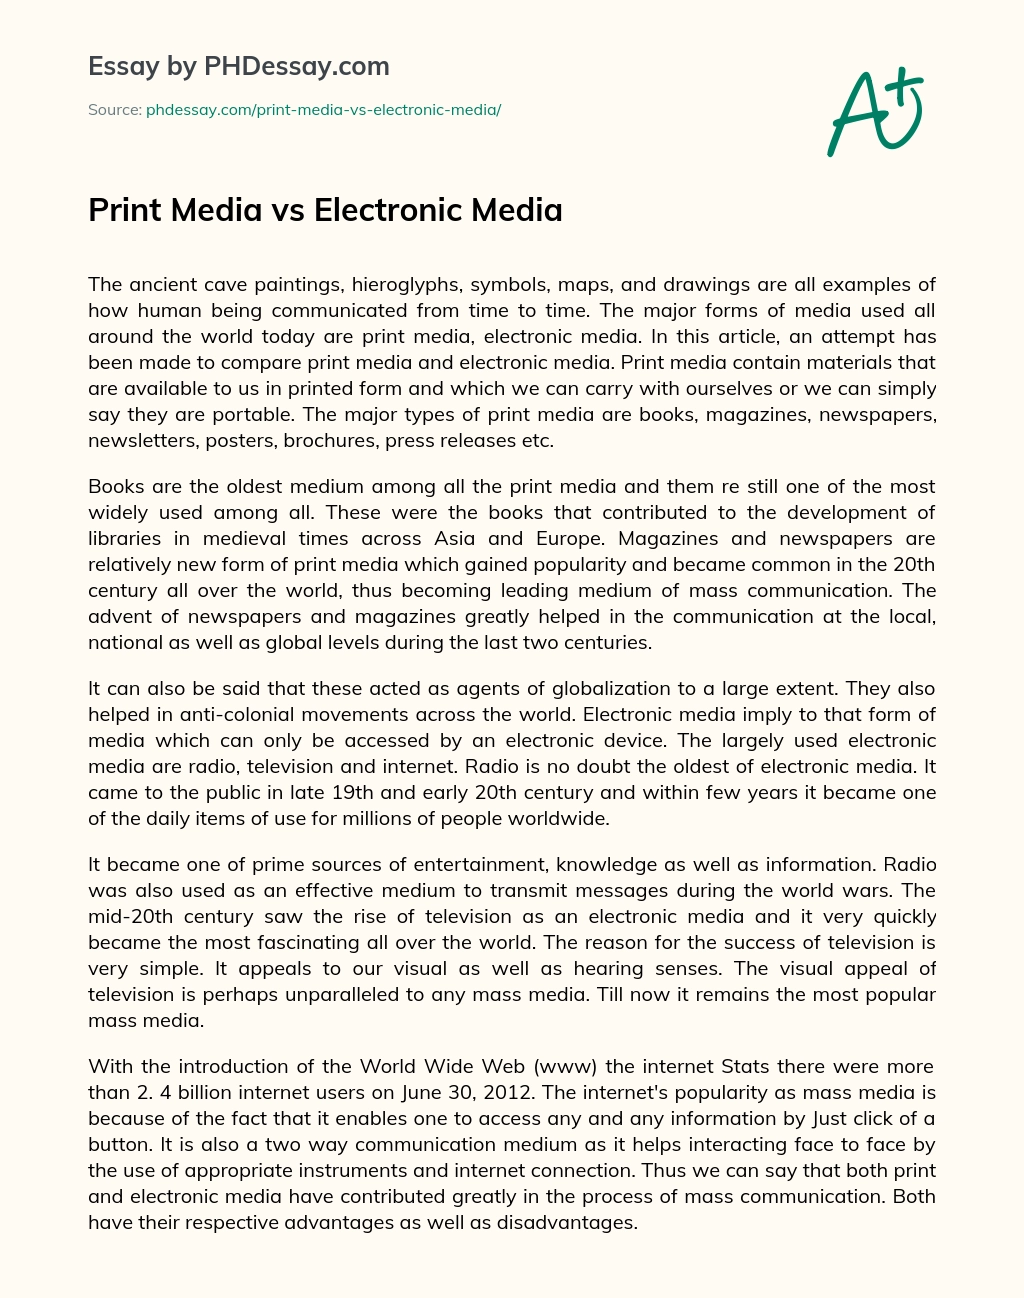 characteristics of print and electronic media